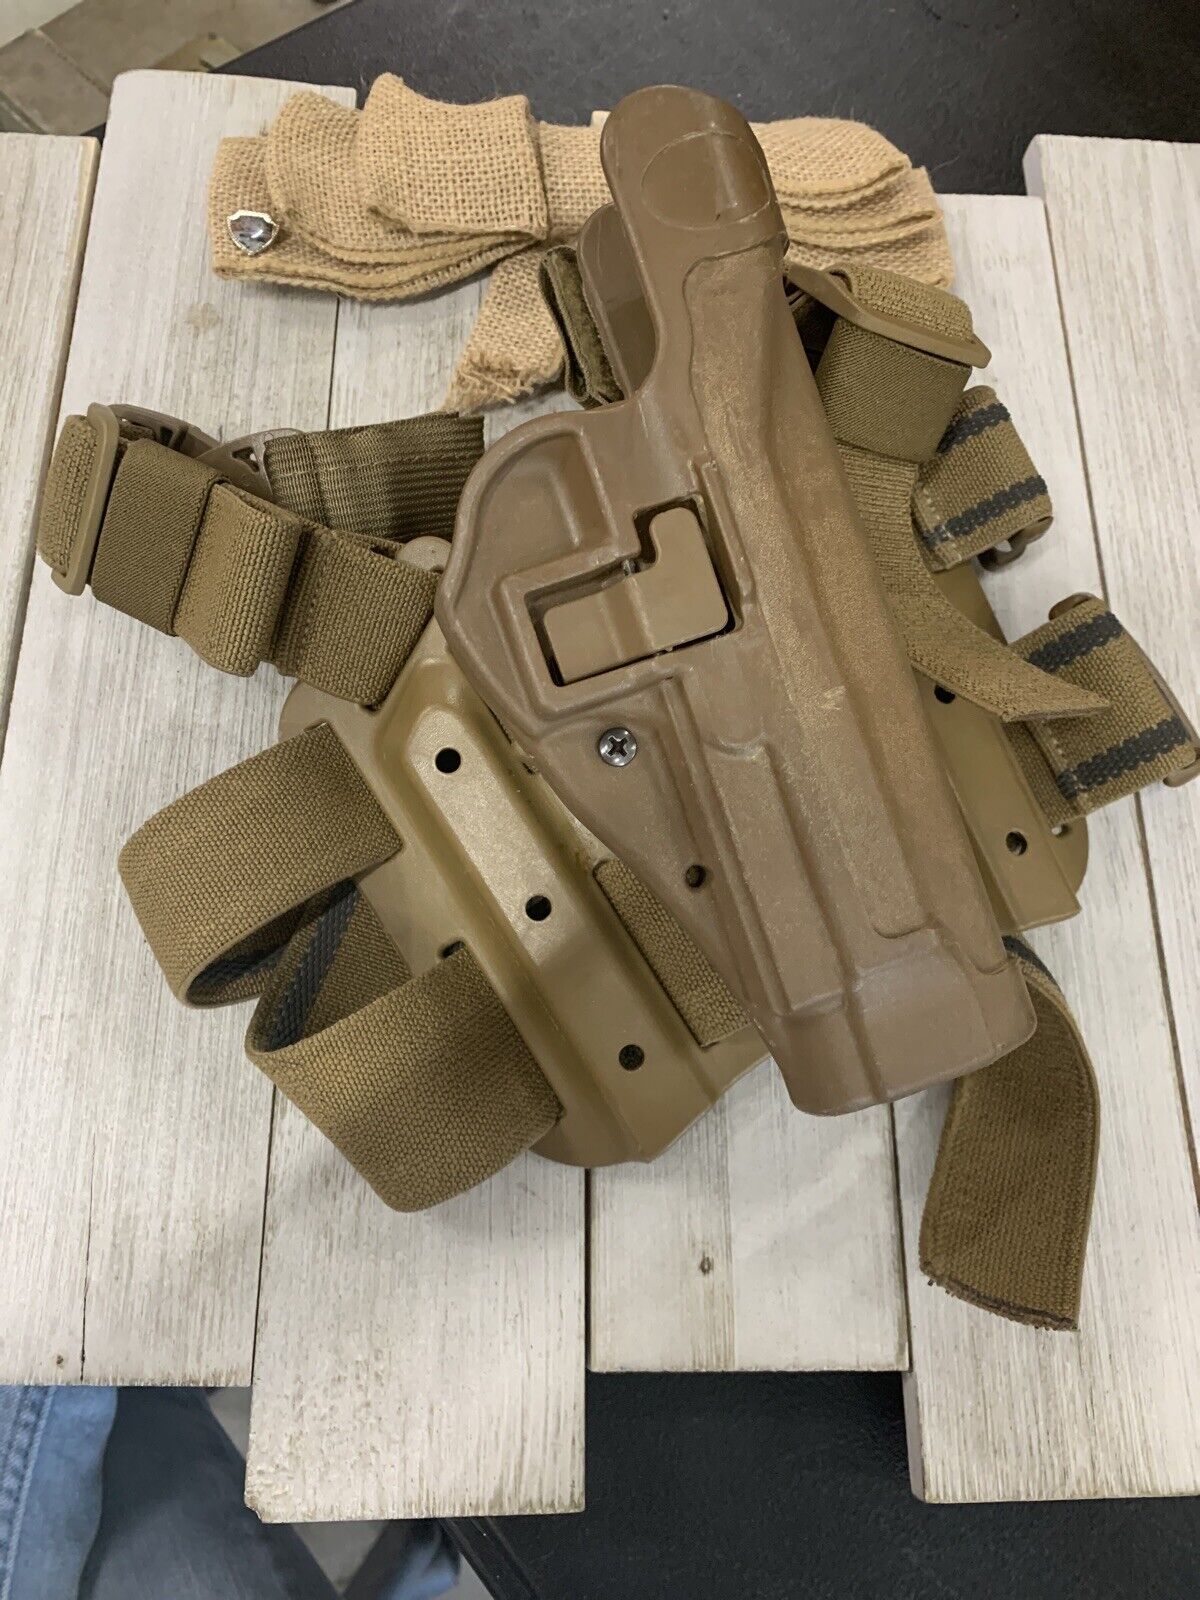 Blackhawk Quick Disconnect Holster And Tactical Holster Platform Assembly